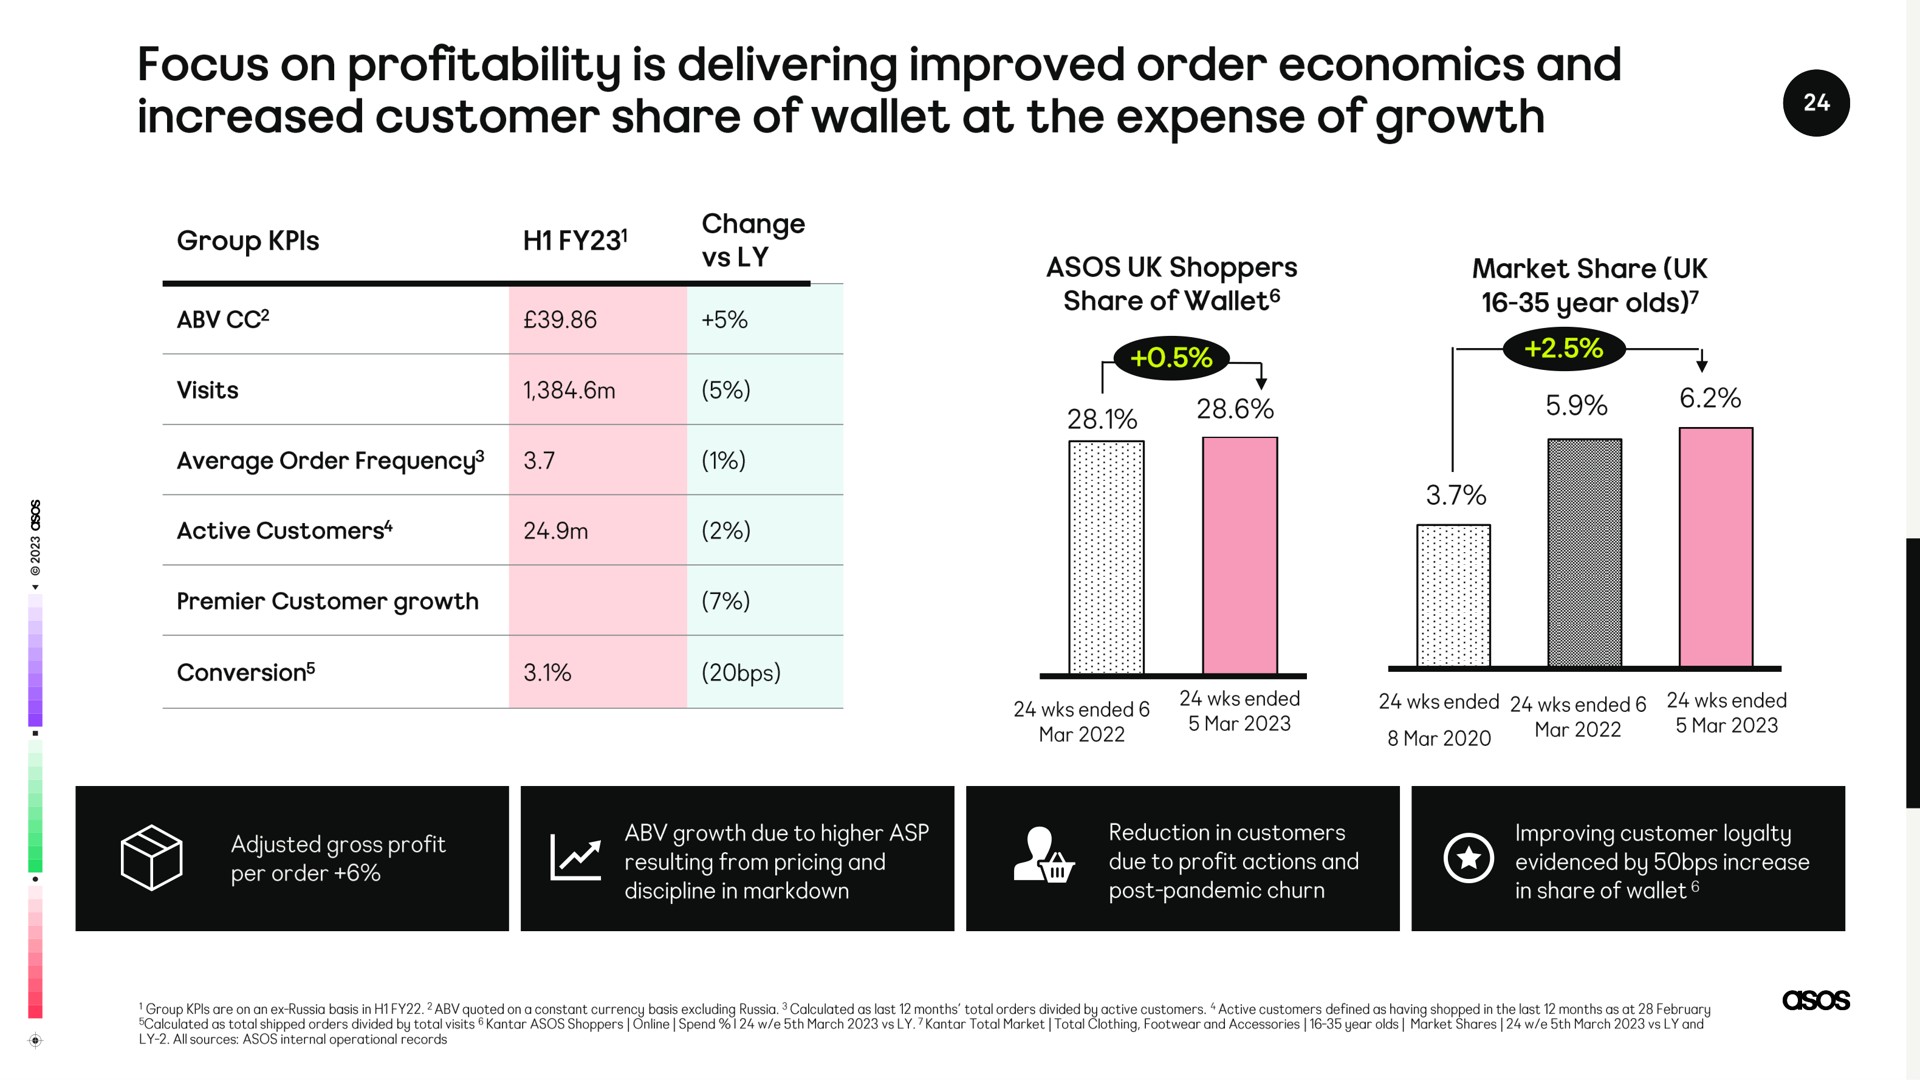 focus on profitability is delivering order economics and increased customer share of wallet at the expense of growth | Asos